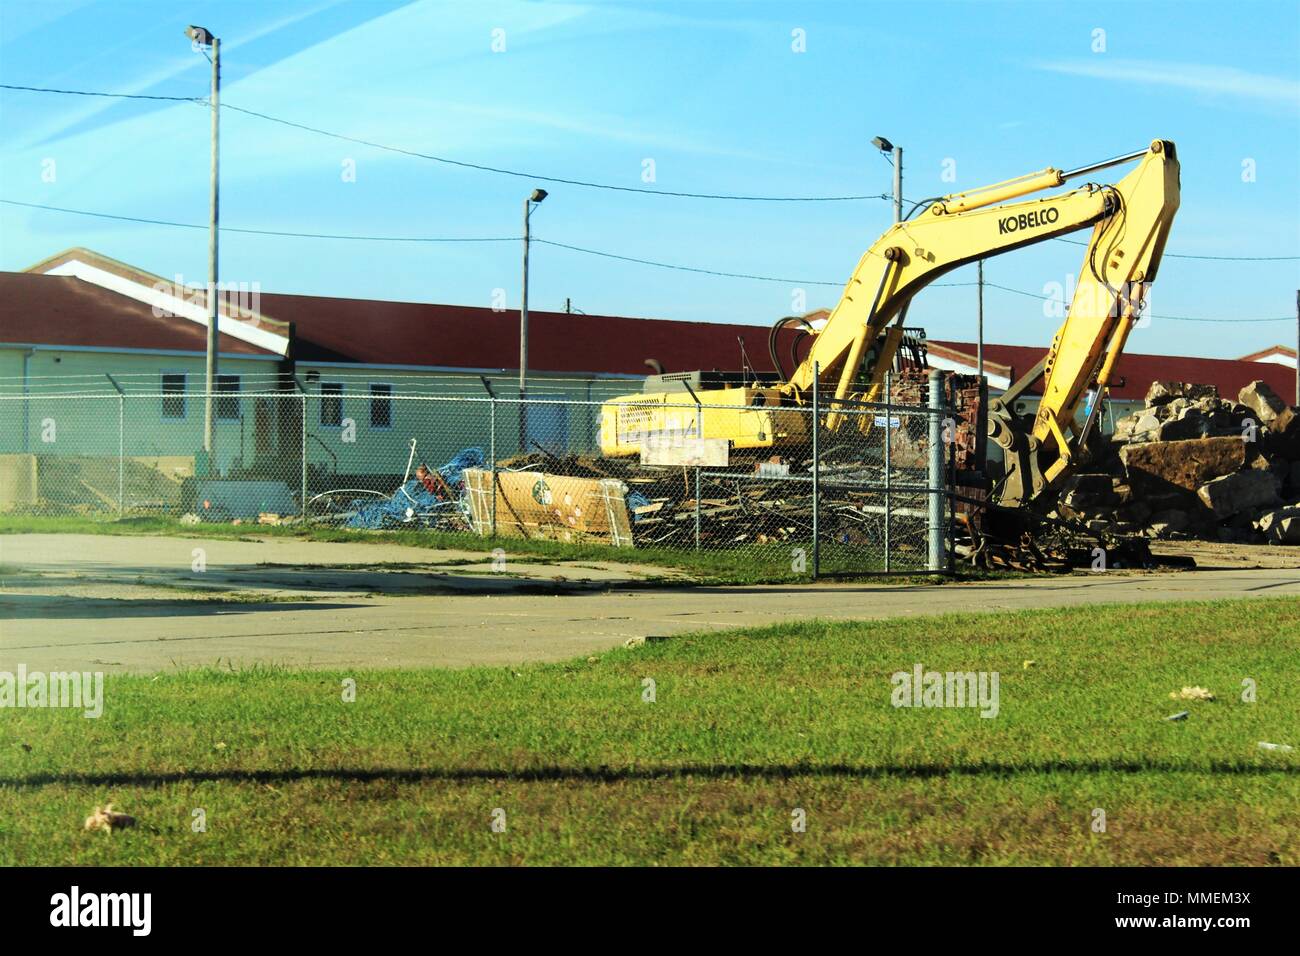 https://c8.alamy.com/comp/MMEM3X/workers-with-contractor-alliance-steel-construction-inc-of-superior-wis-remove-debris-of-an-old-building-oct-20-2017-on-the-cantonment-area-at-fort-mccoy-wis-the-contractor-removed-12-buildings-as-part-of-a-task-order-coordinated-by-the-directorate-of-public-works-us-army-photo-by-scott-t-sturkol-public-affairs-office-fort-mccoy-wis-MMEM3X.jpg